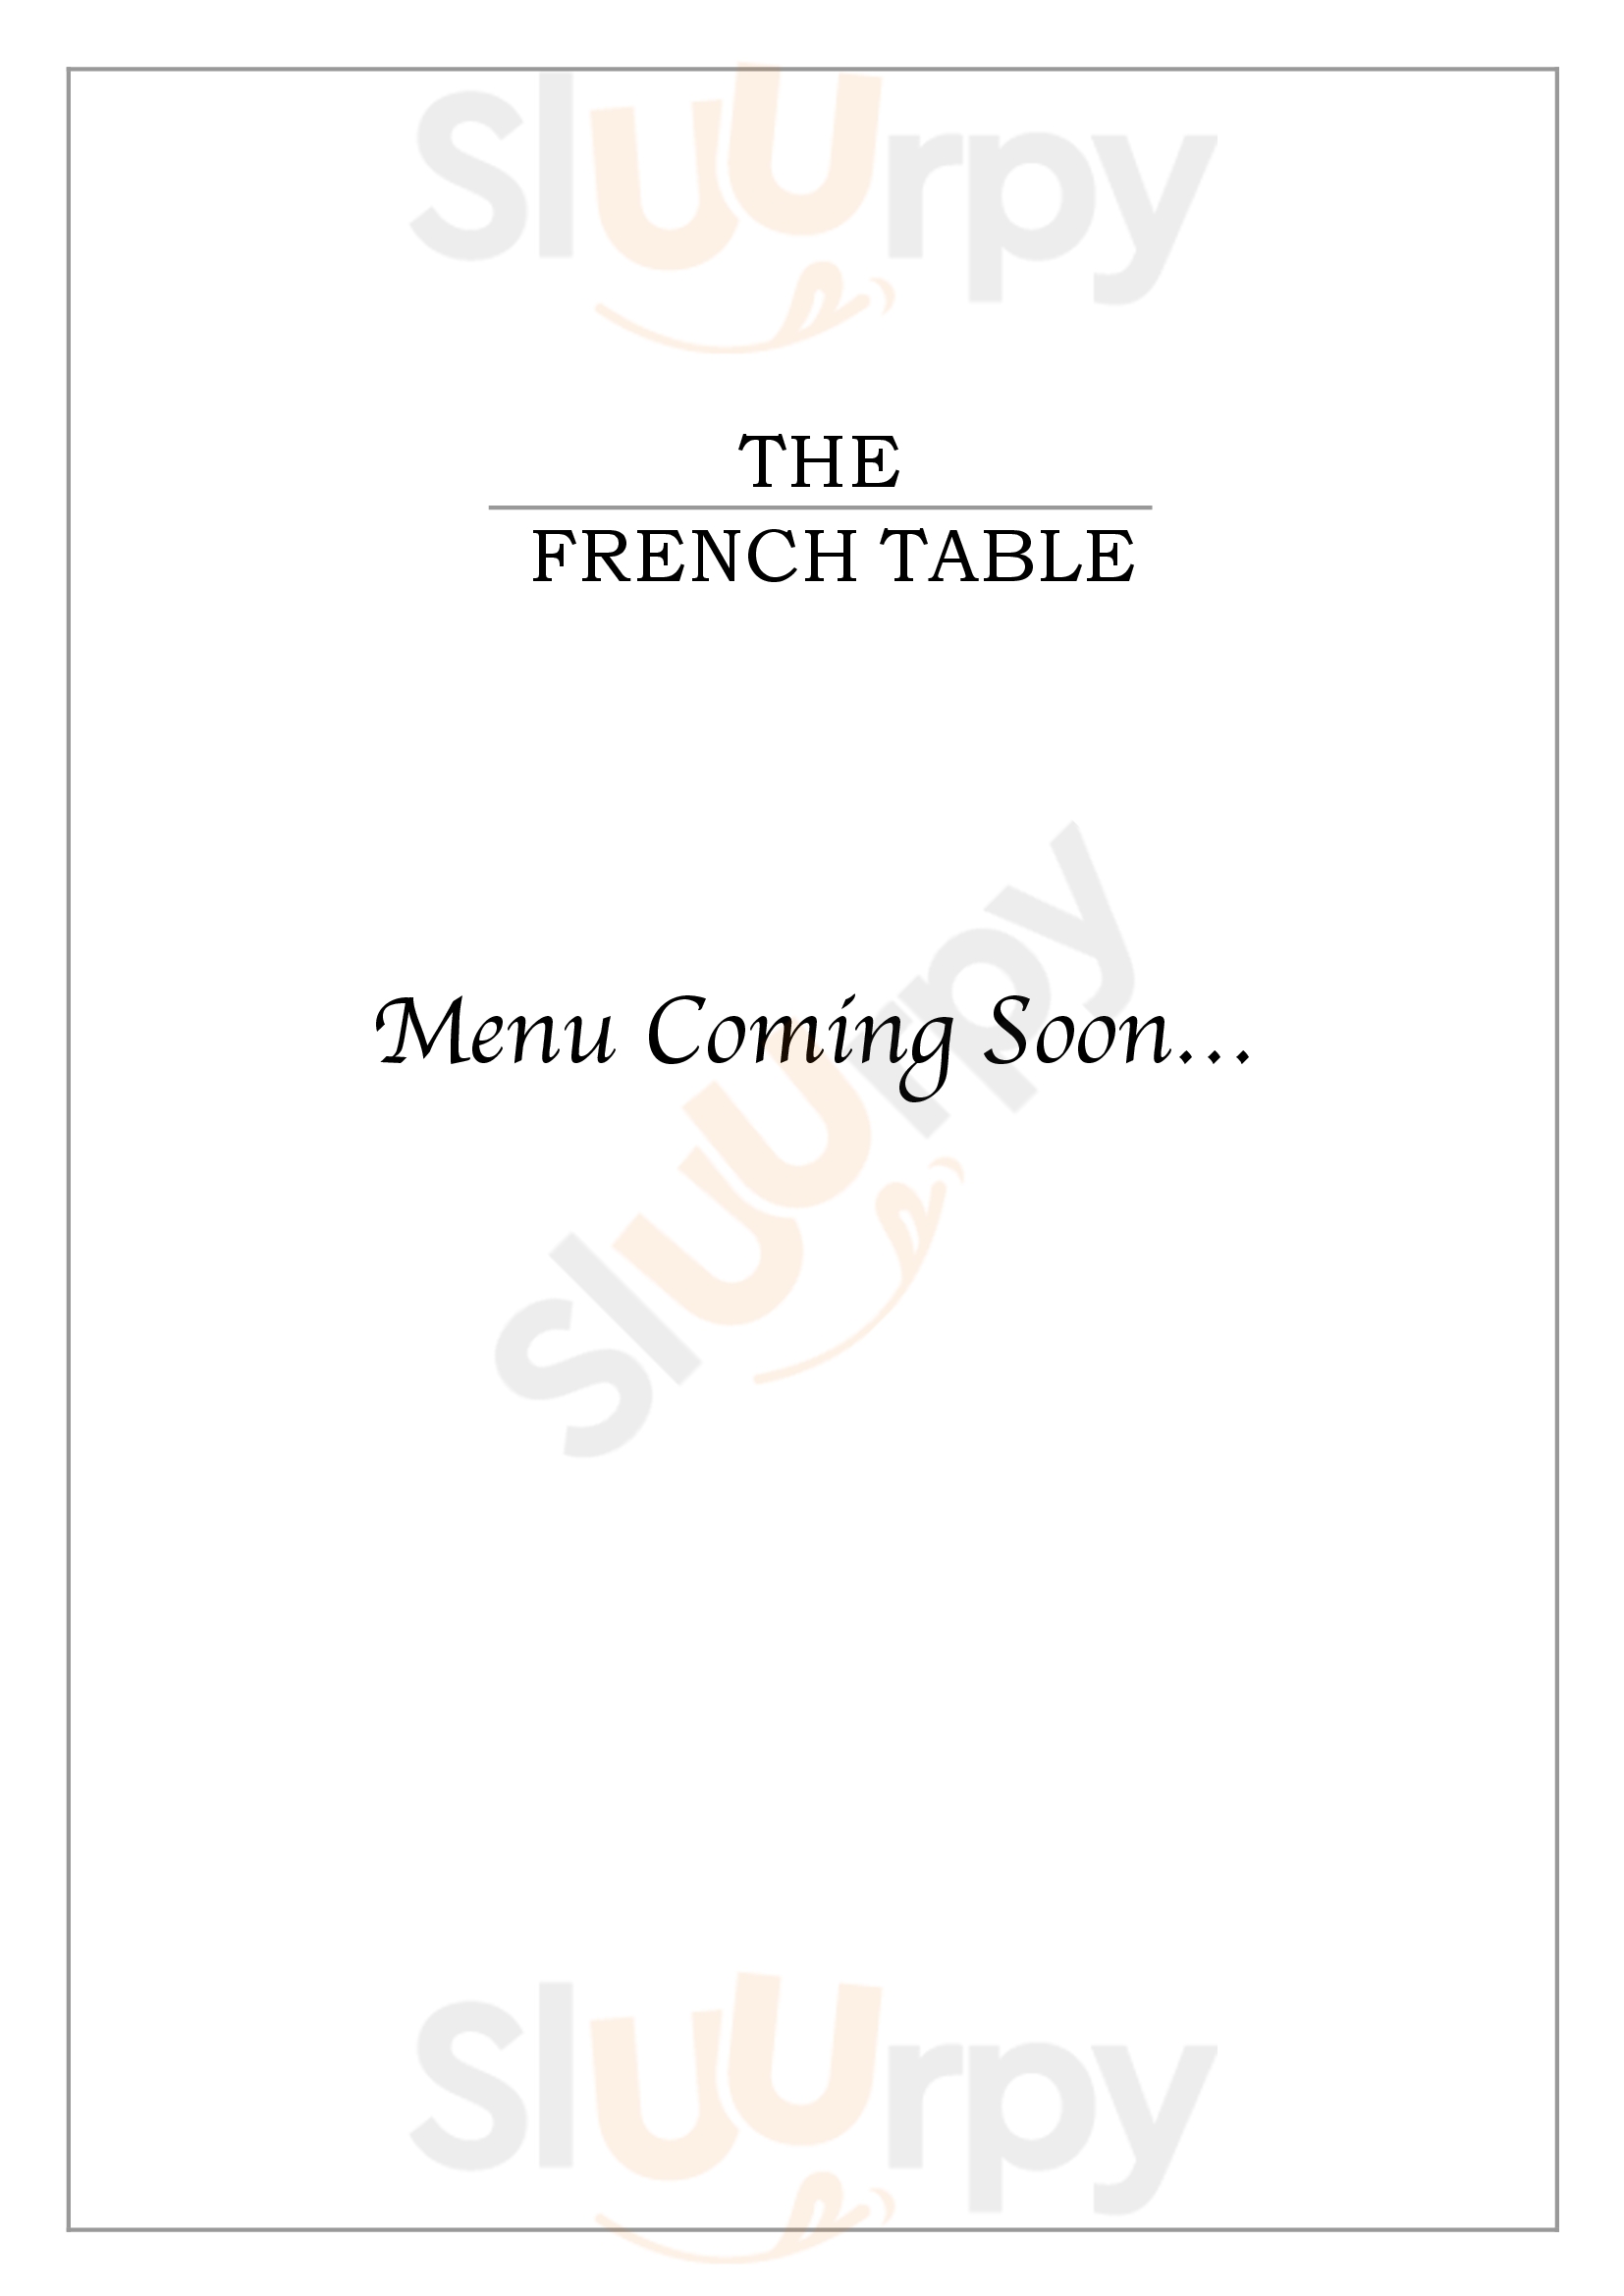 The French Table Limerick Menu - 1